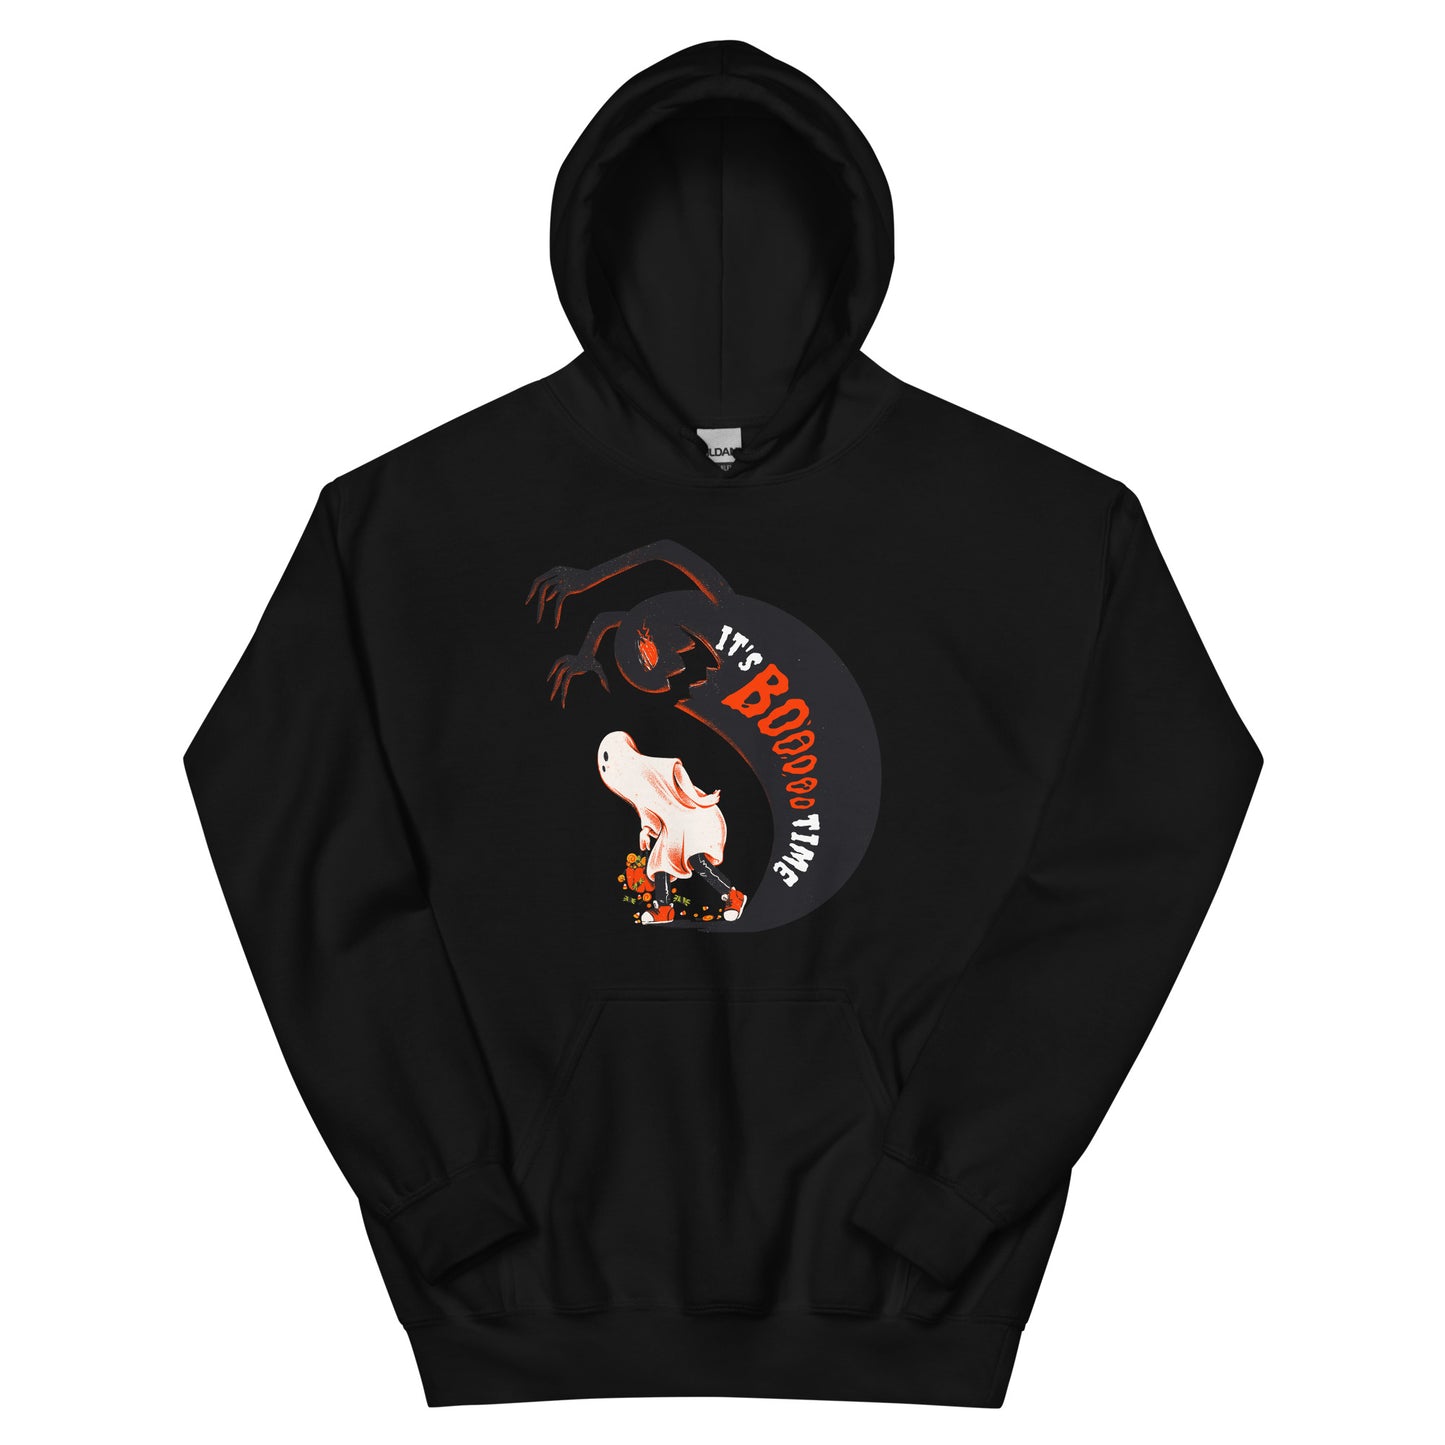 IT'S BOO TIME - Unisex Hoodie